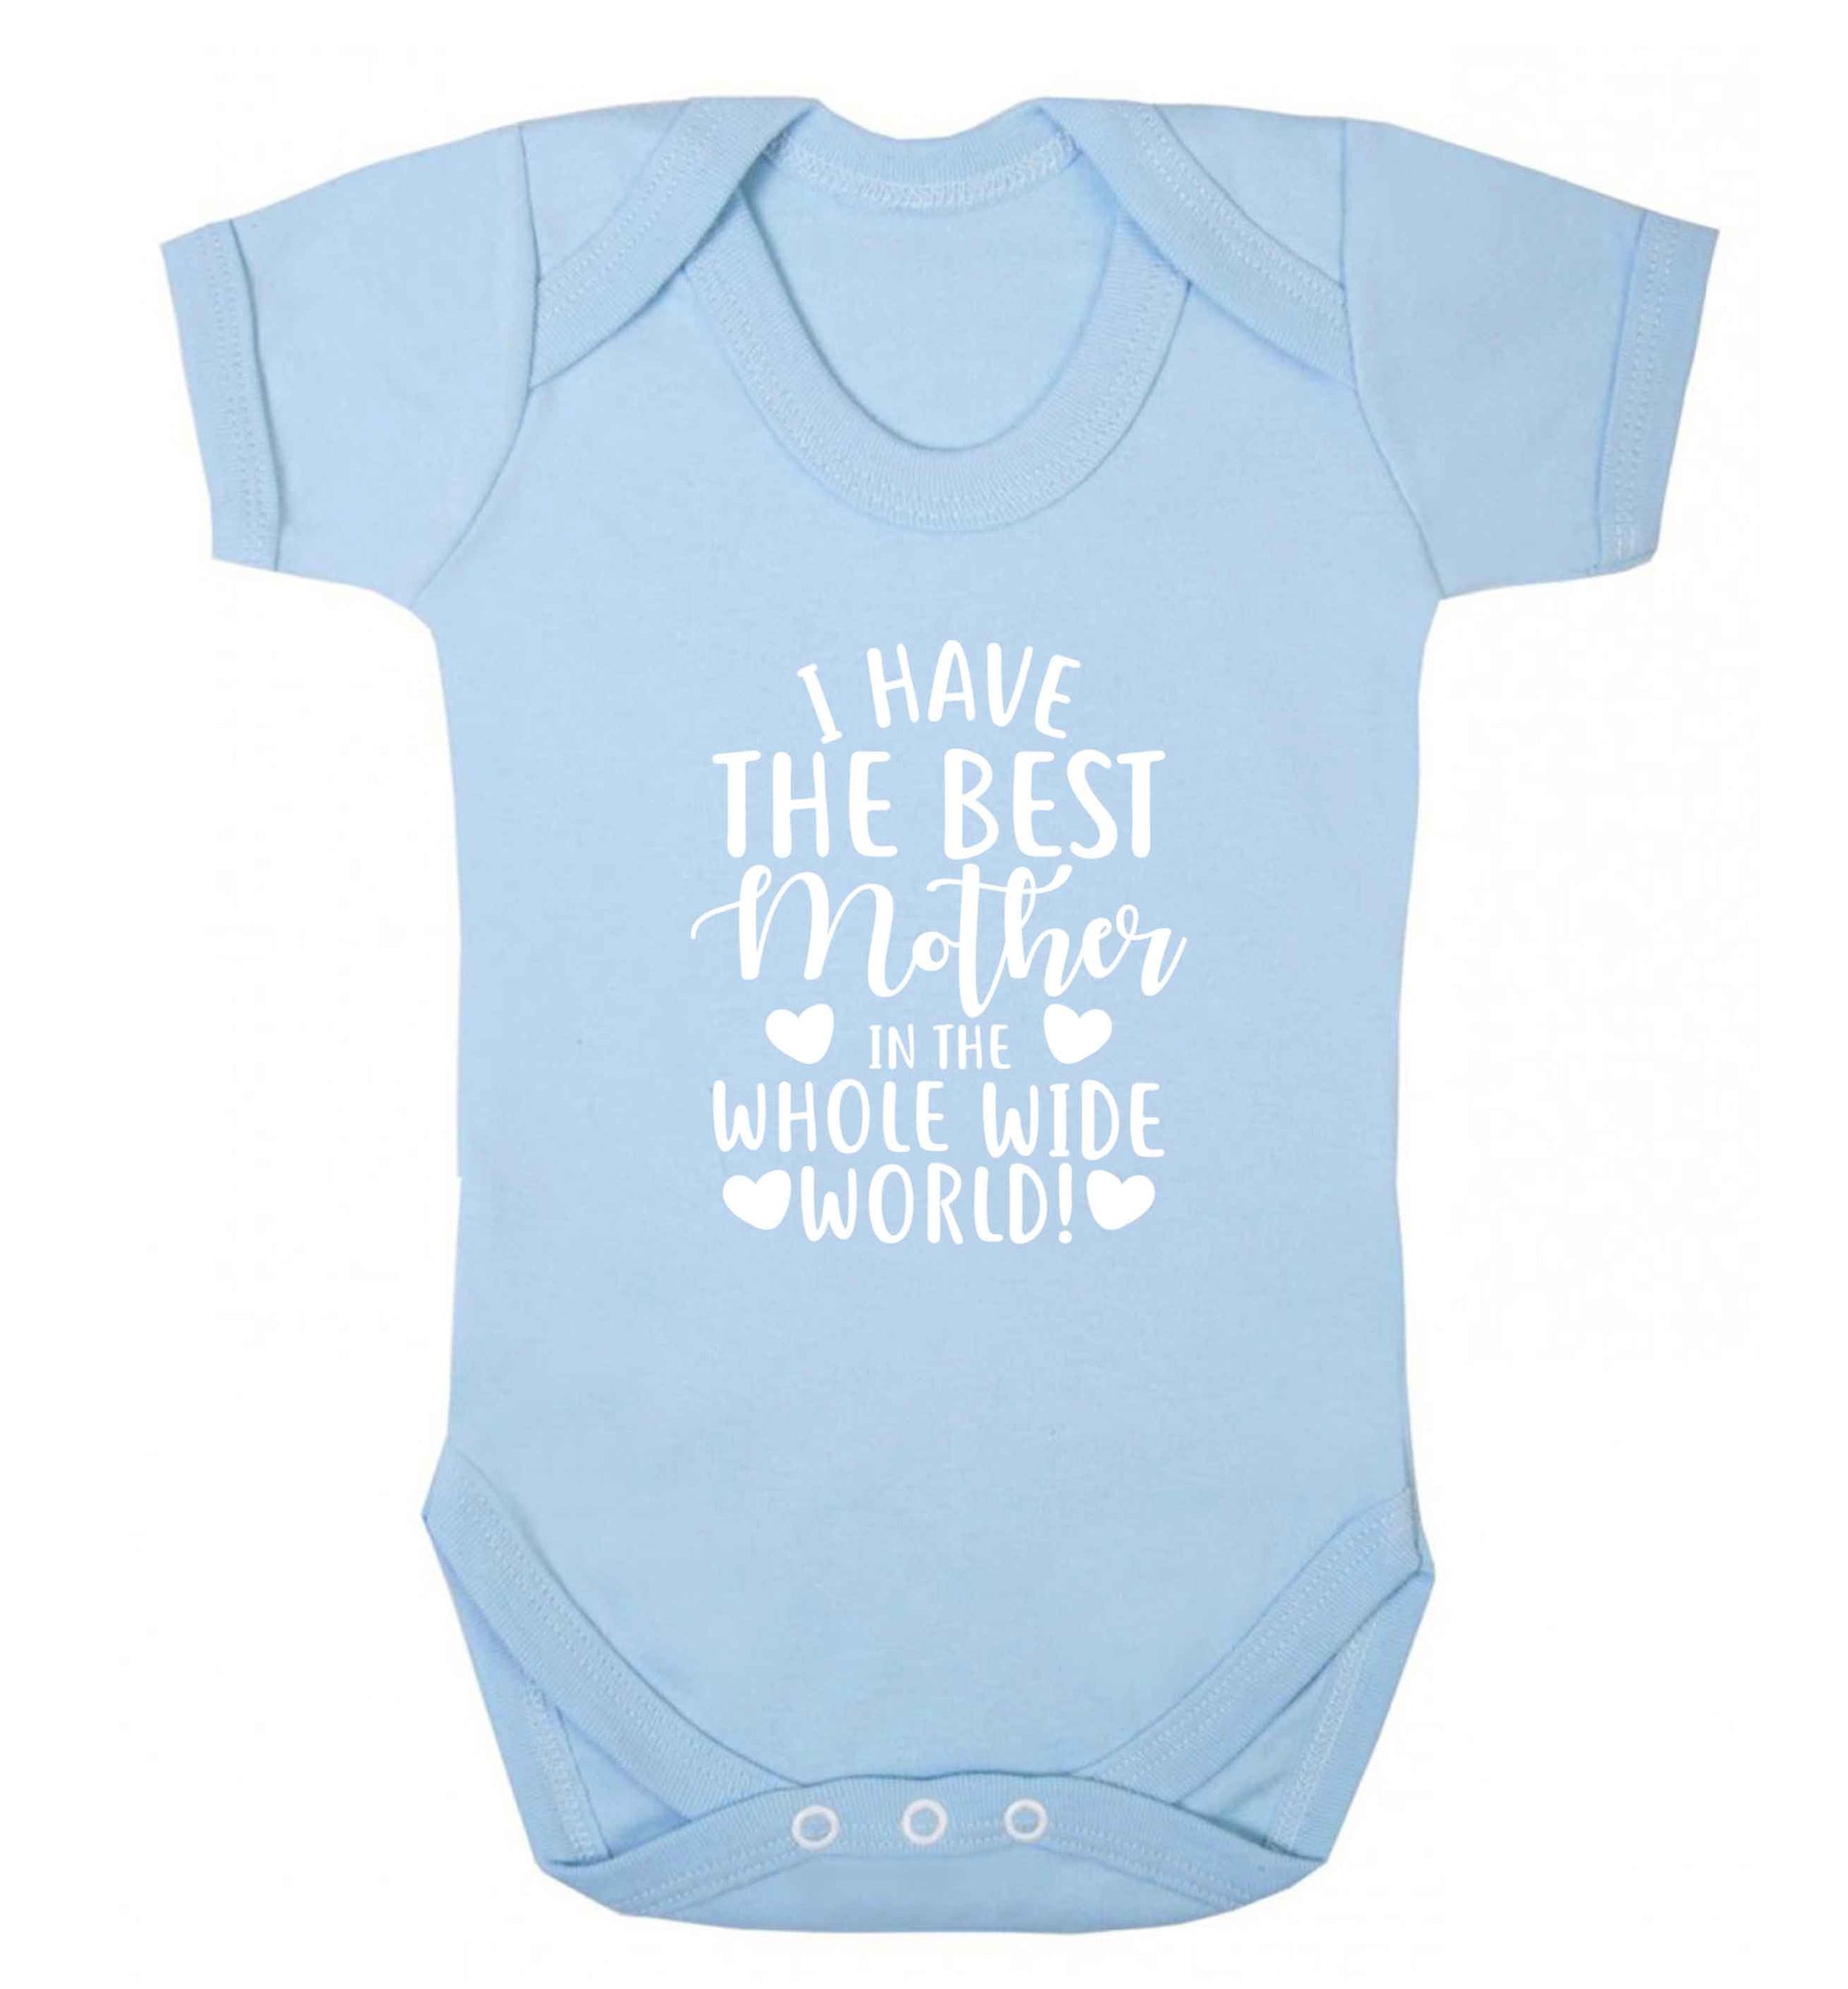 I have the best mother in the whole wide world baby vest pale blue 18-24 months